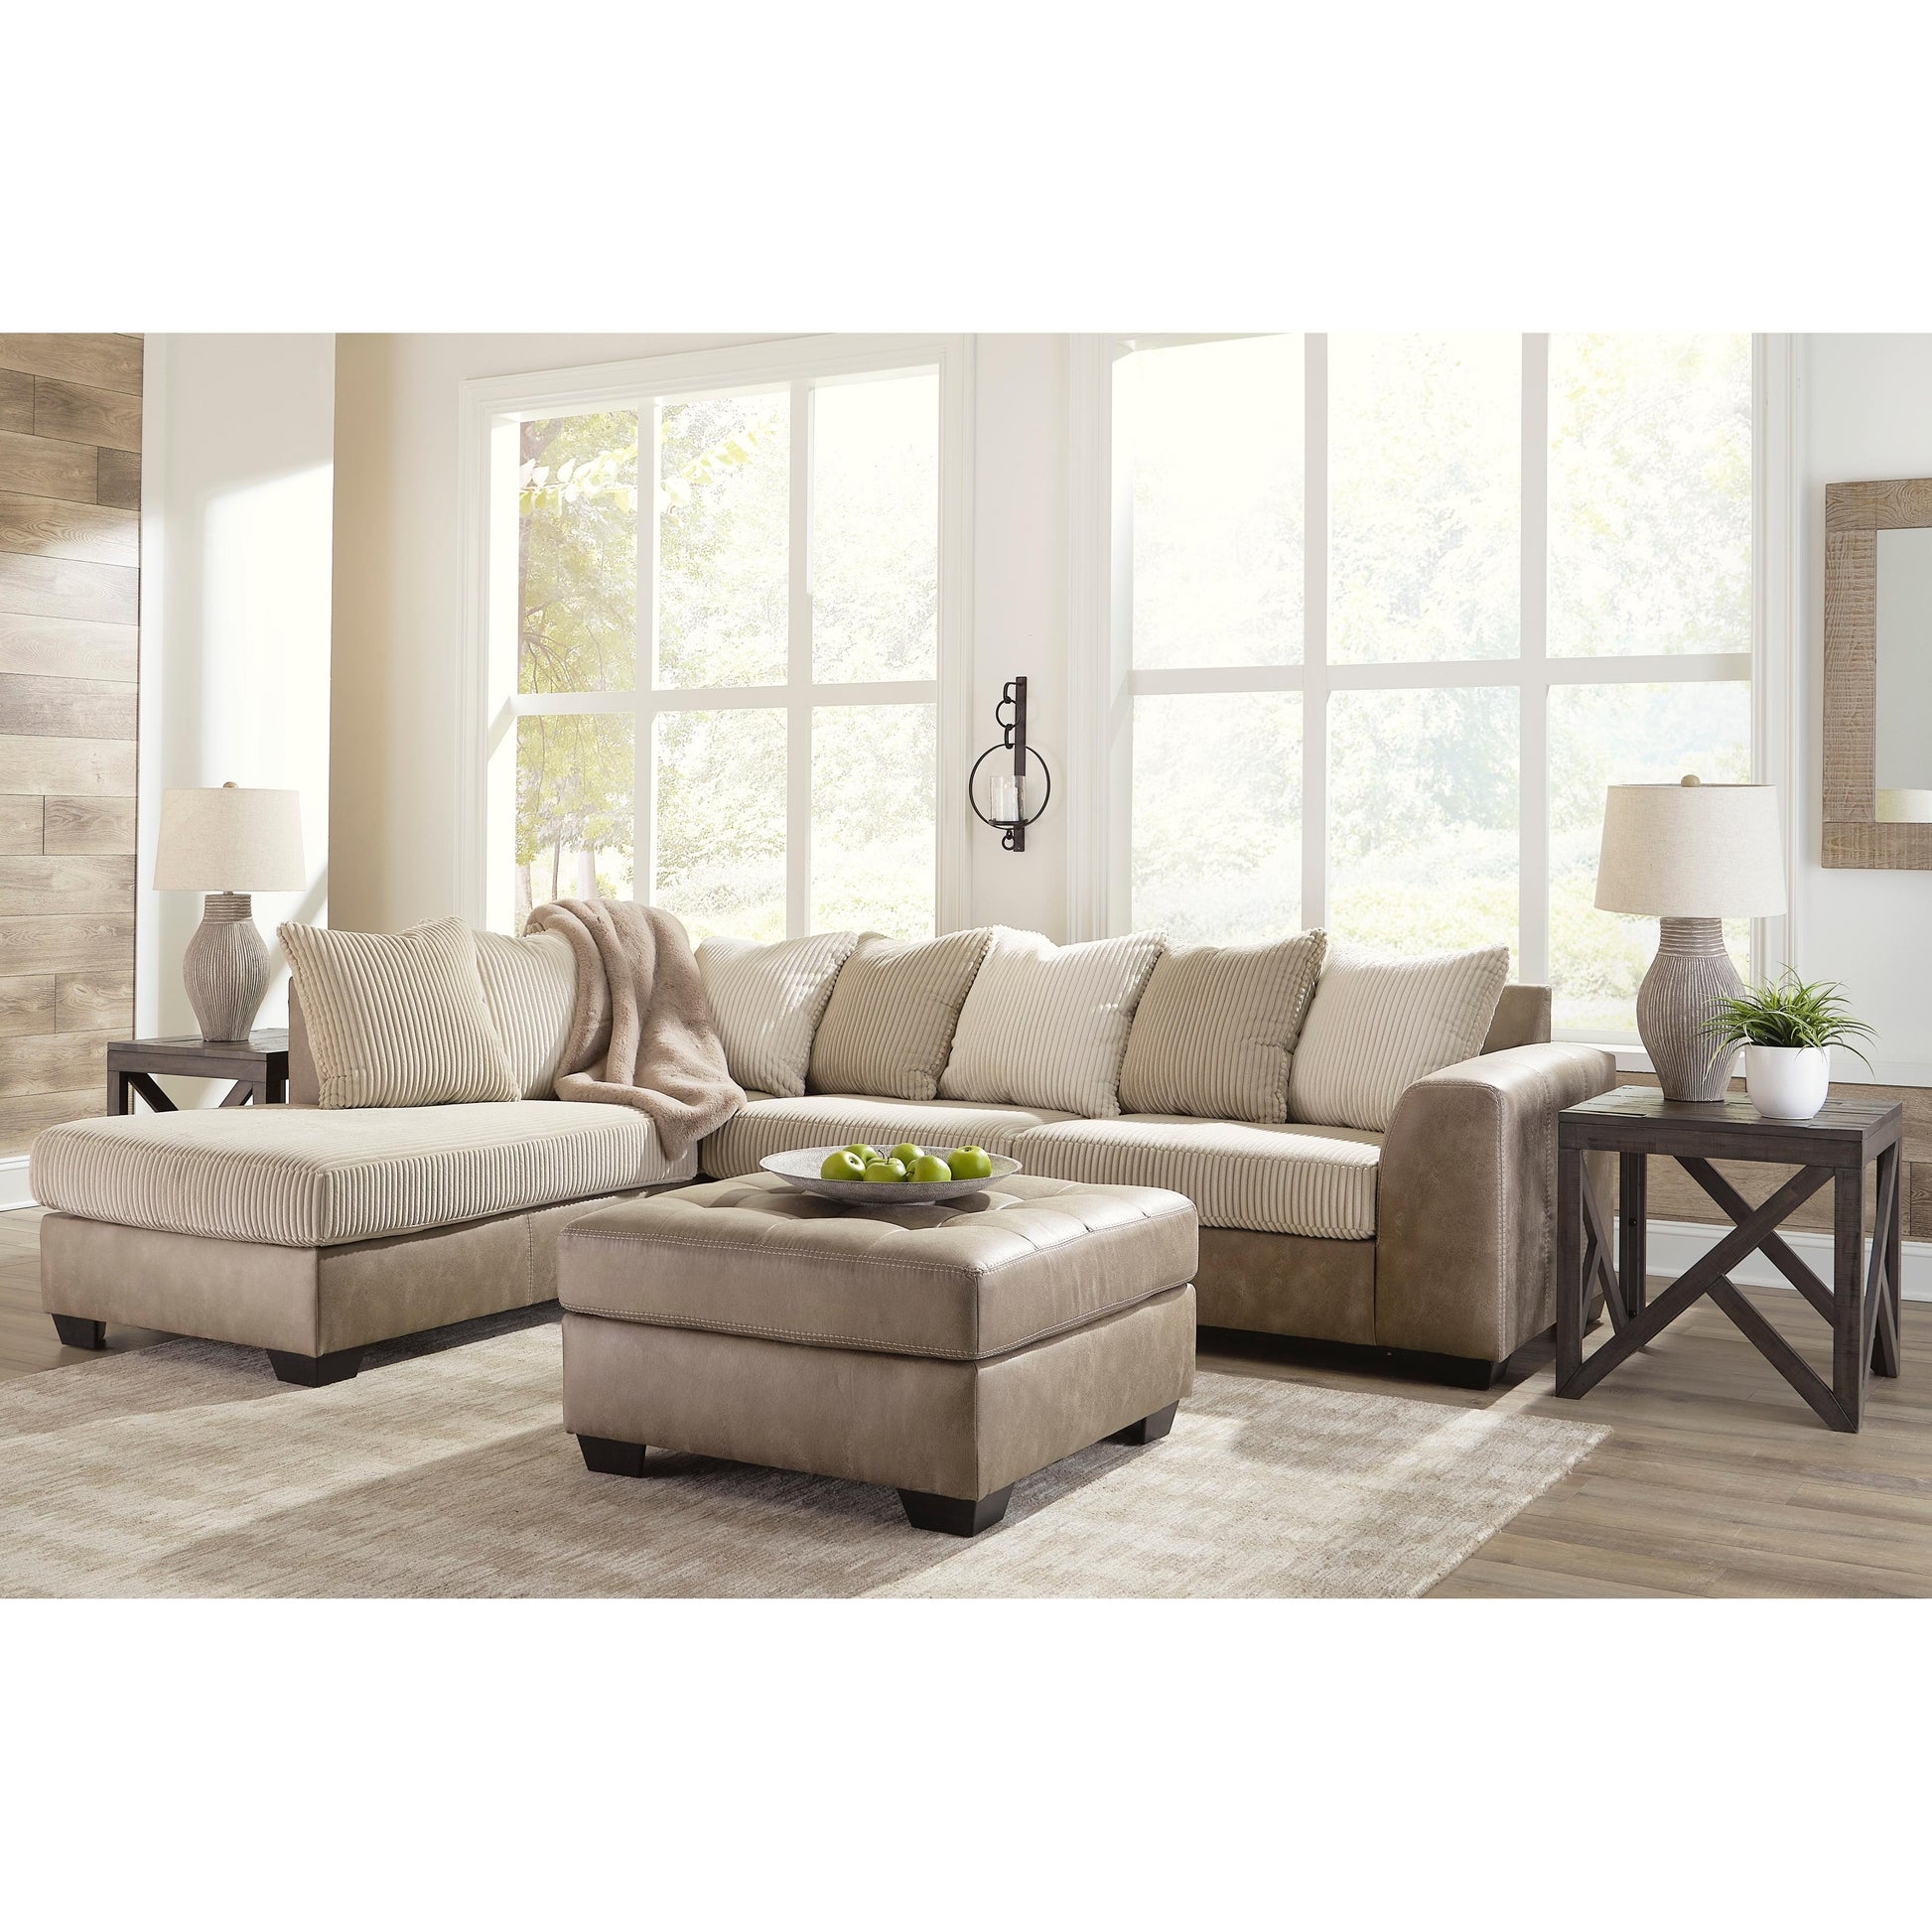 Signature Design by Ashley Keskin Fabric and Leather Look 2 pc Sectional 1840316/1840367 IMAGE 6